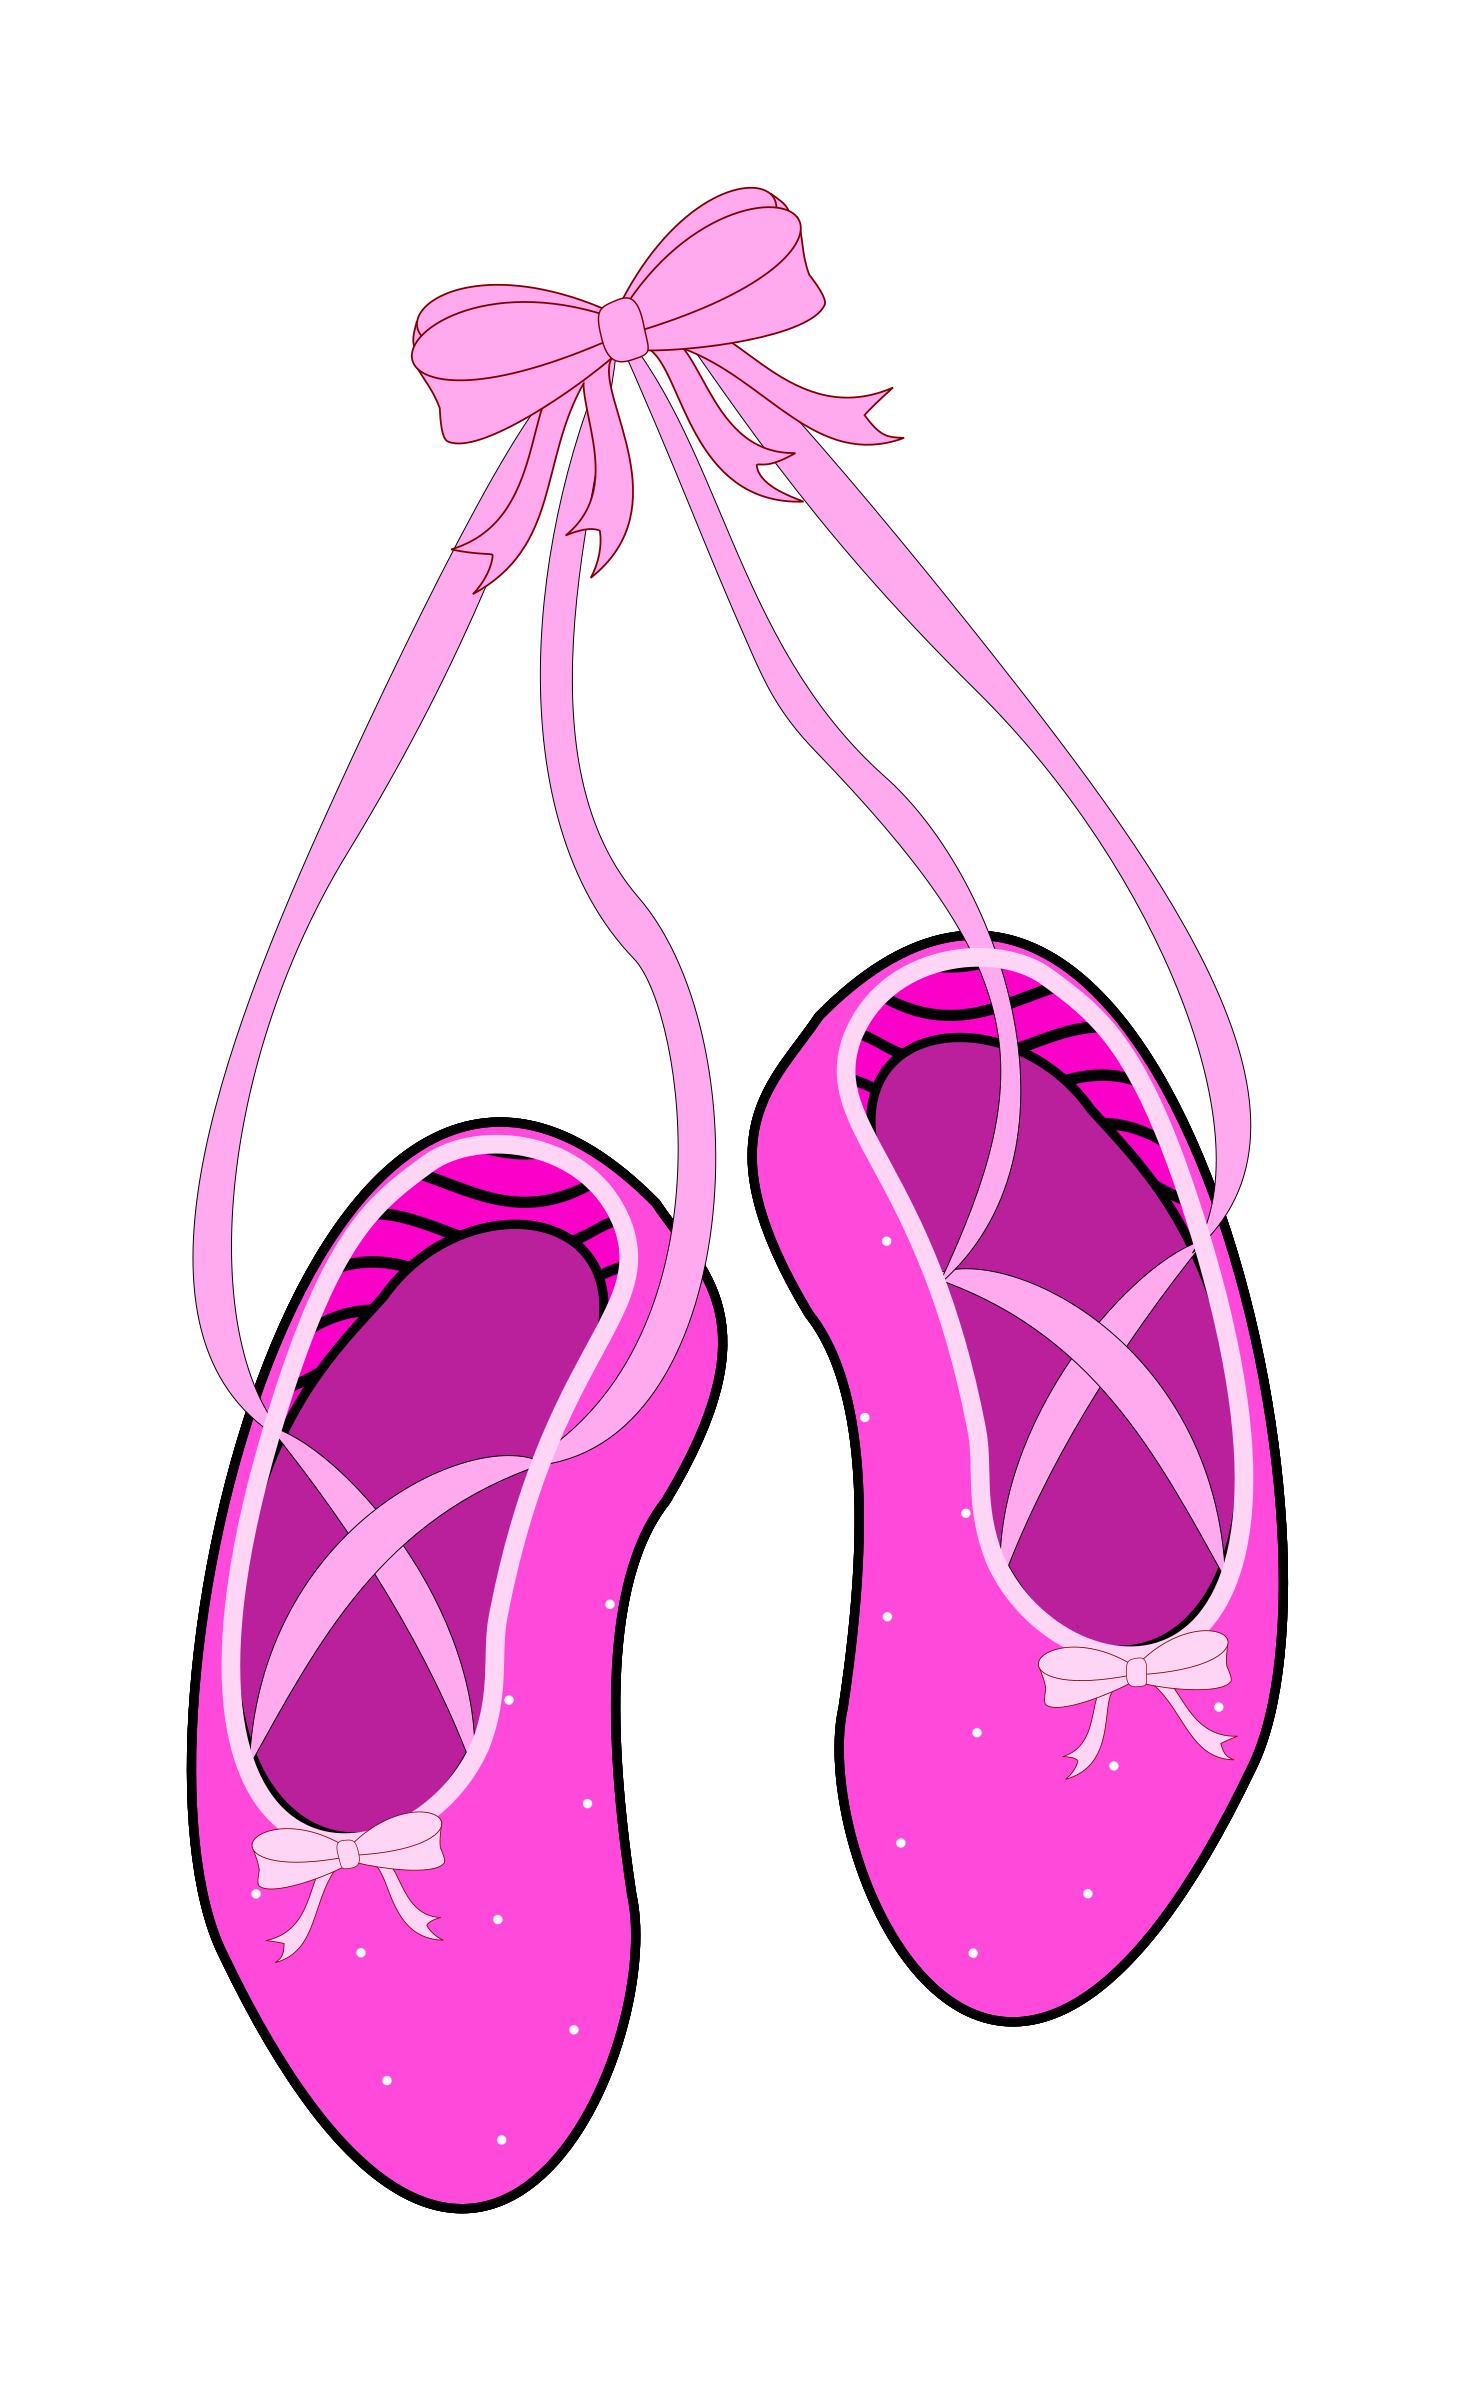 Pink Ballet Slippers